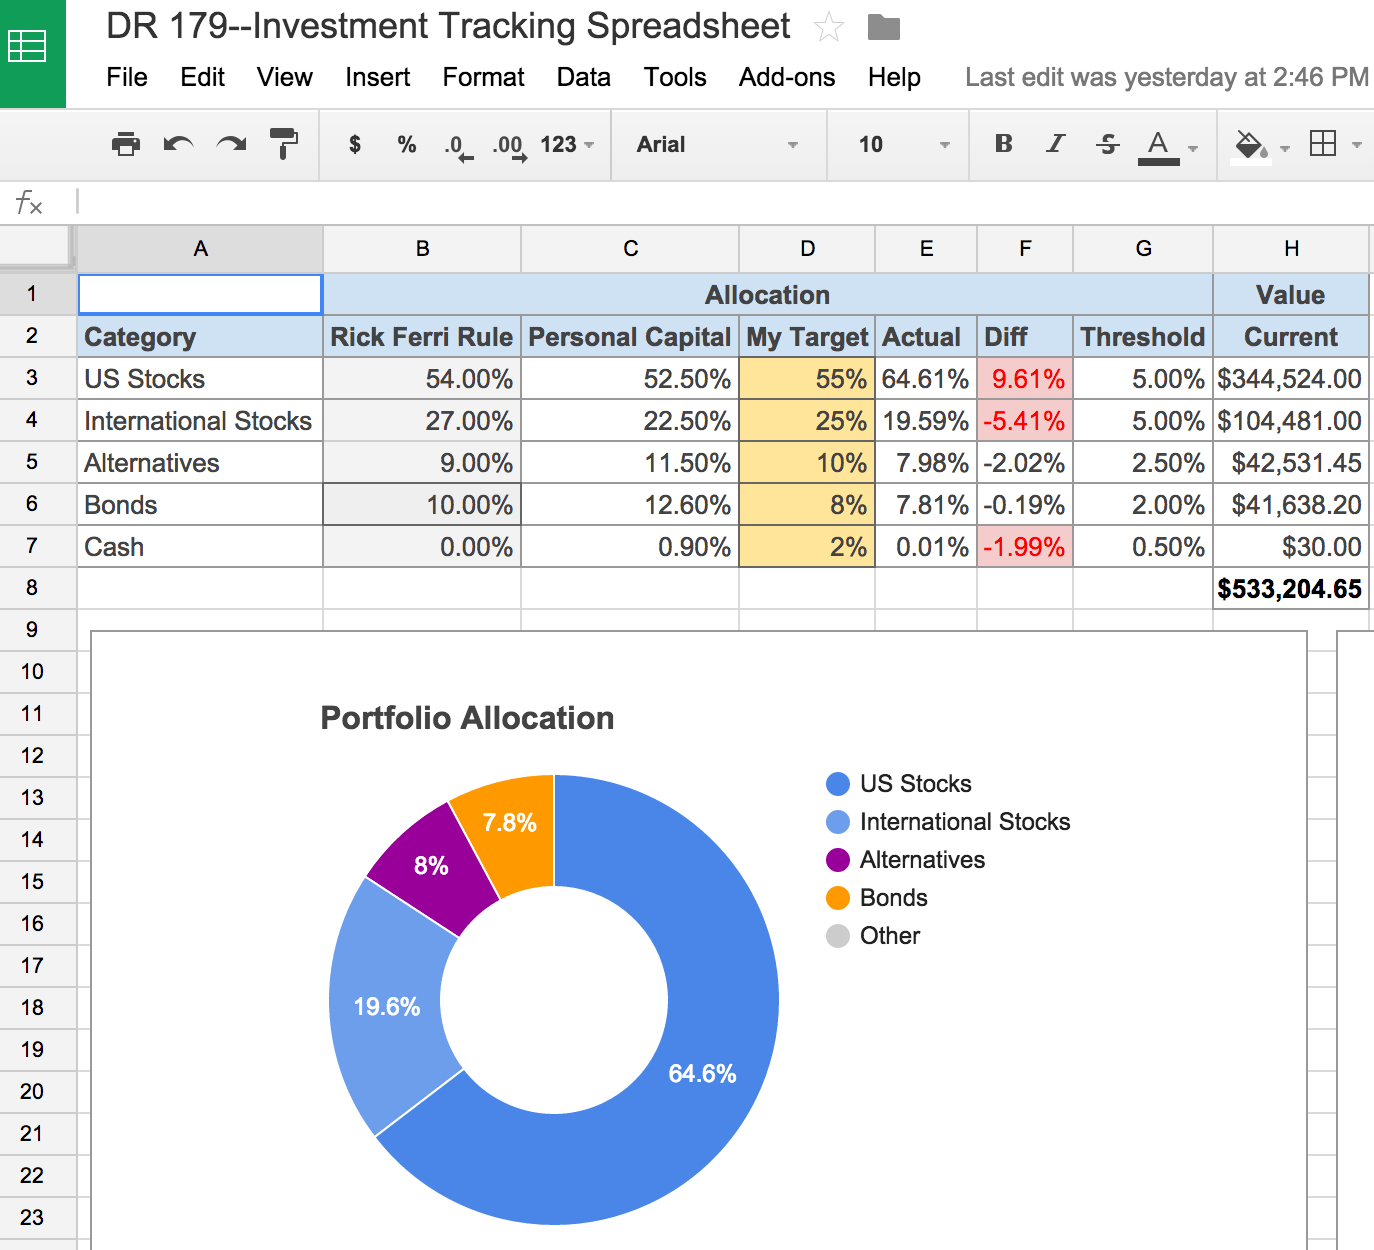 Portfolio Management Spreadsheet Throughout An Awesome And Free Investment Tracking Spreadsheet